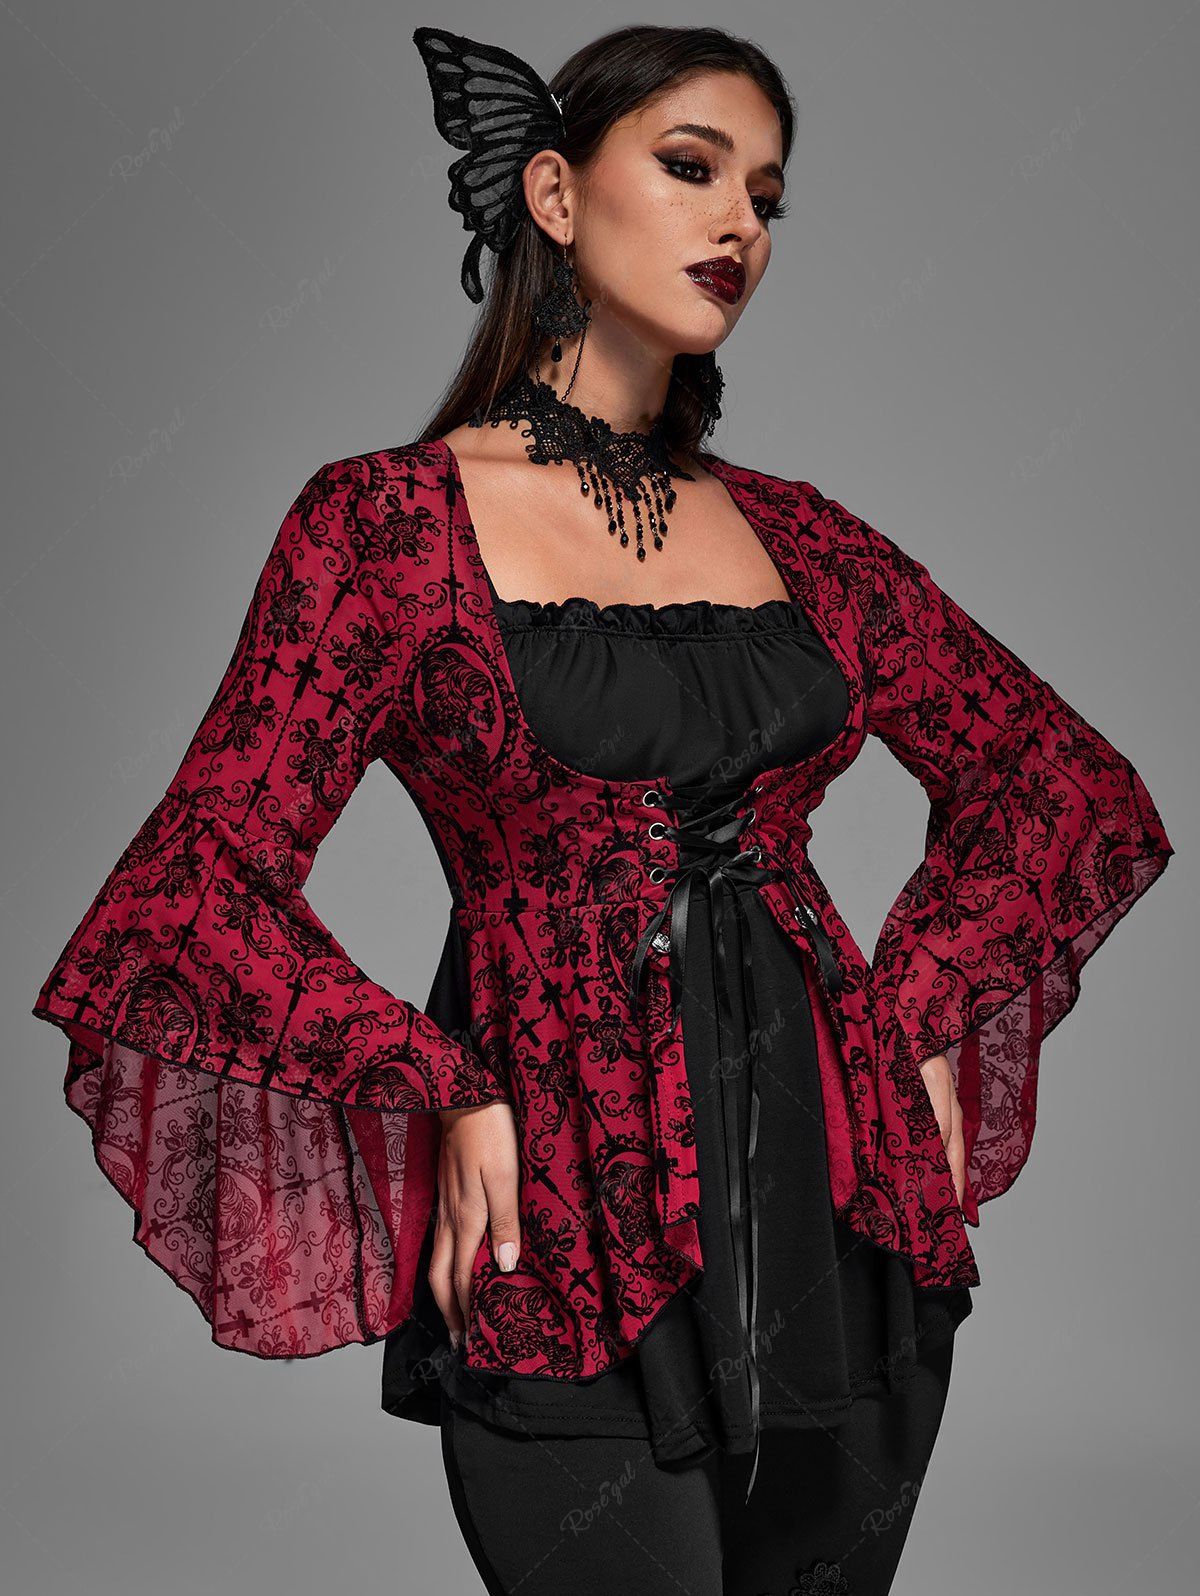 Gothic Bell Sleeves Cross Floral Mesh Flocking Lace Up Ruched Ruffles 2 in 1 Long Sleeves Top